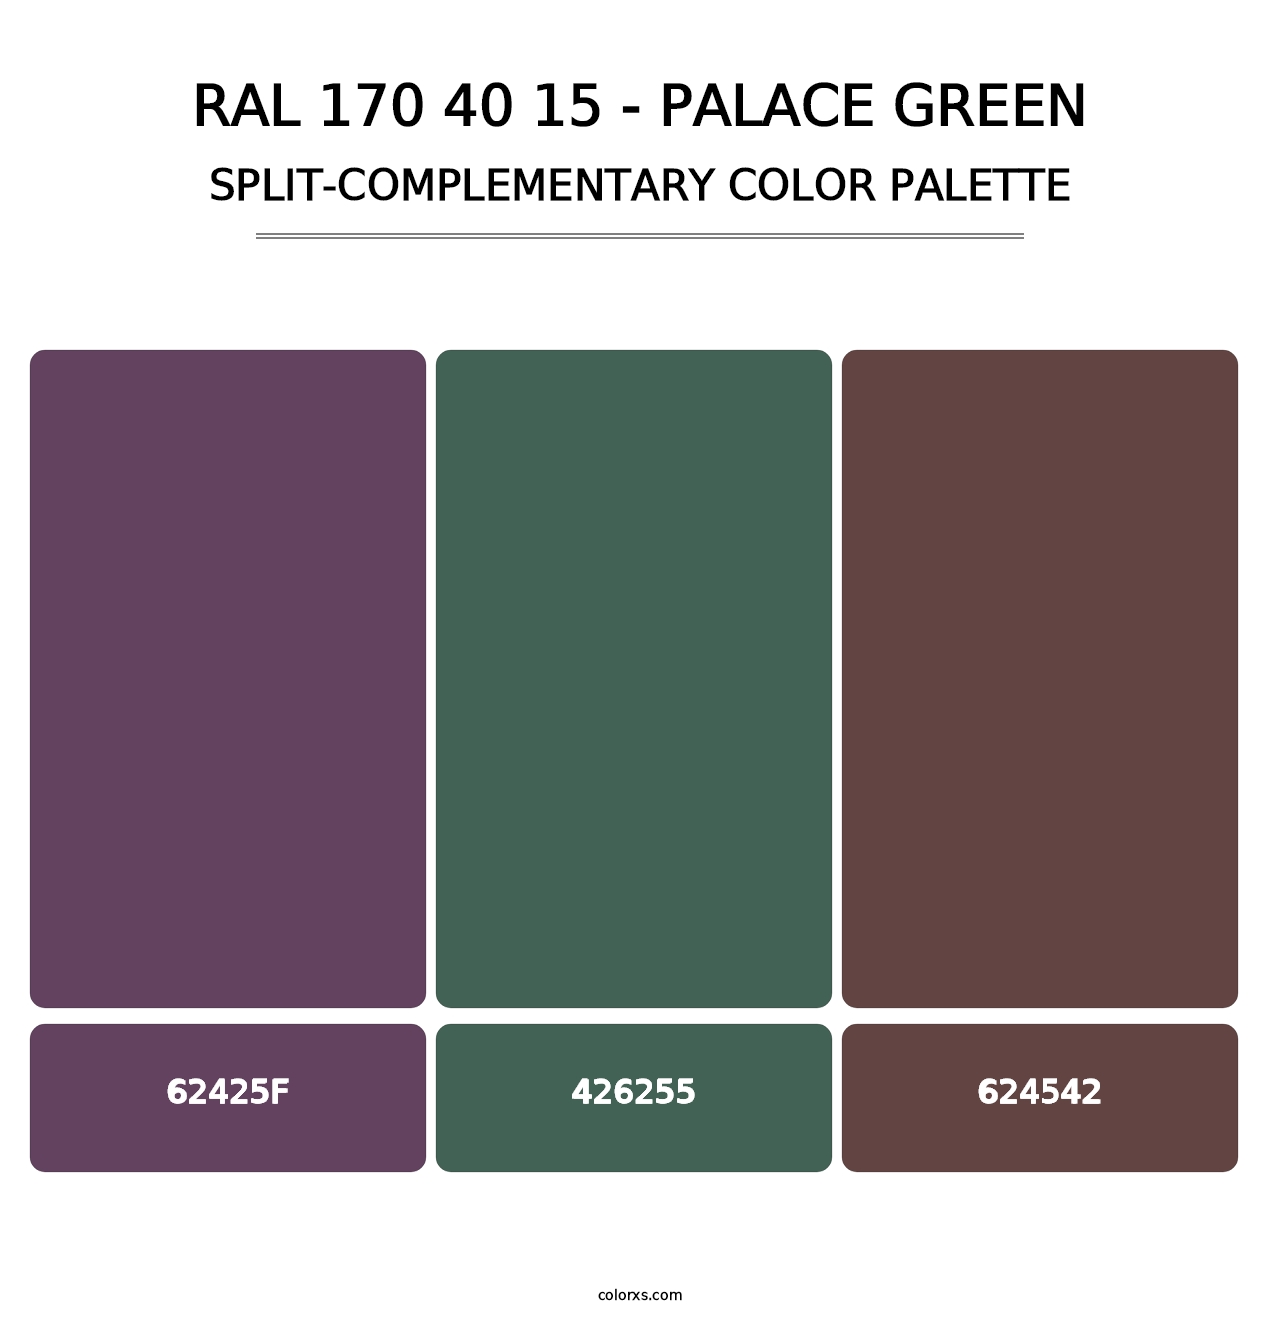 RAL 170 40 15 - Palace Green - Split-Complementary Color Palette